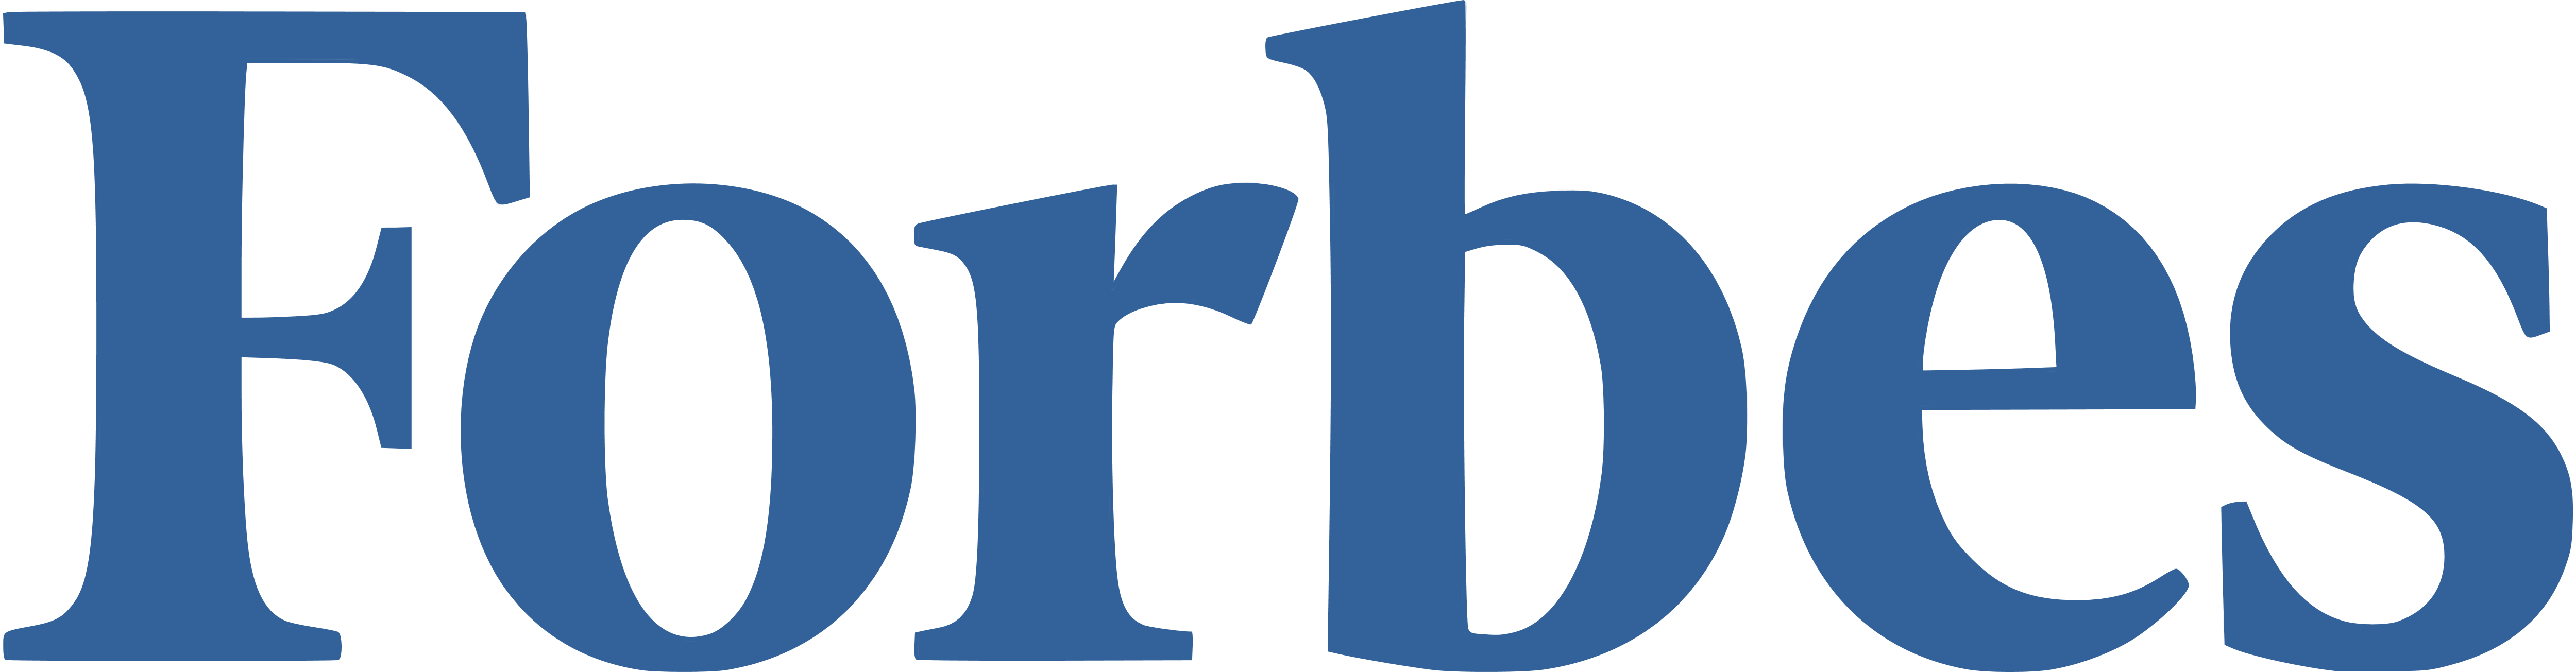 Forbes Logo PNG - 175666